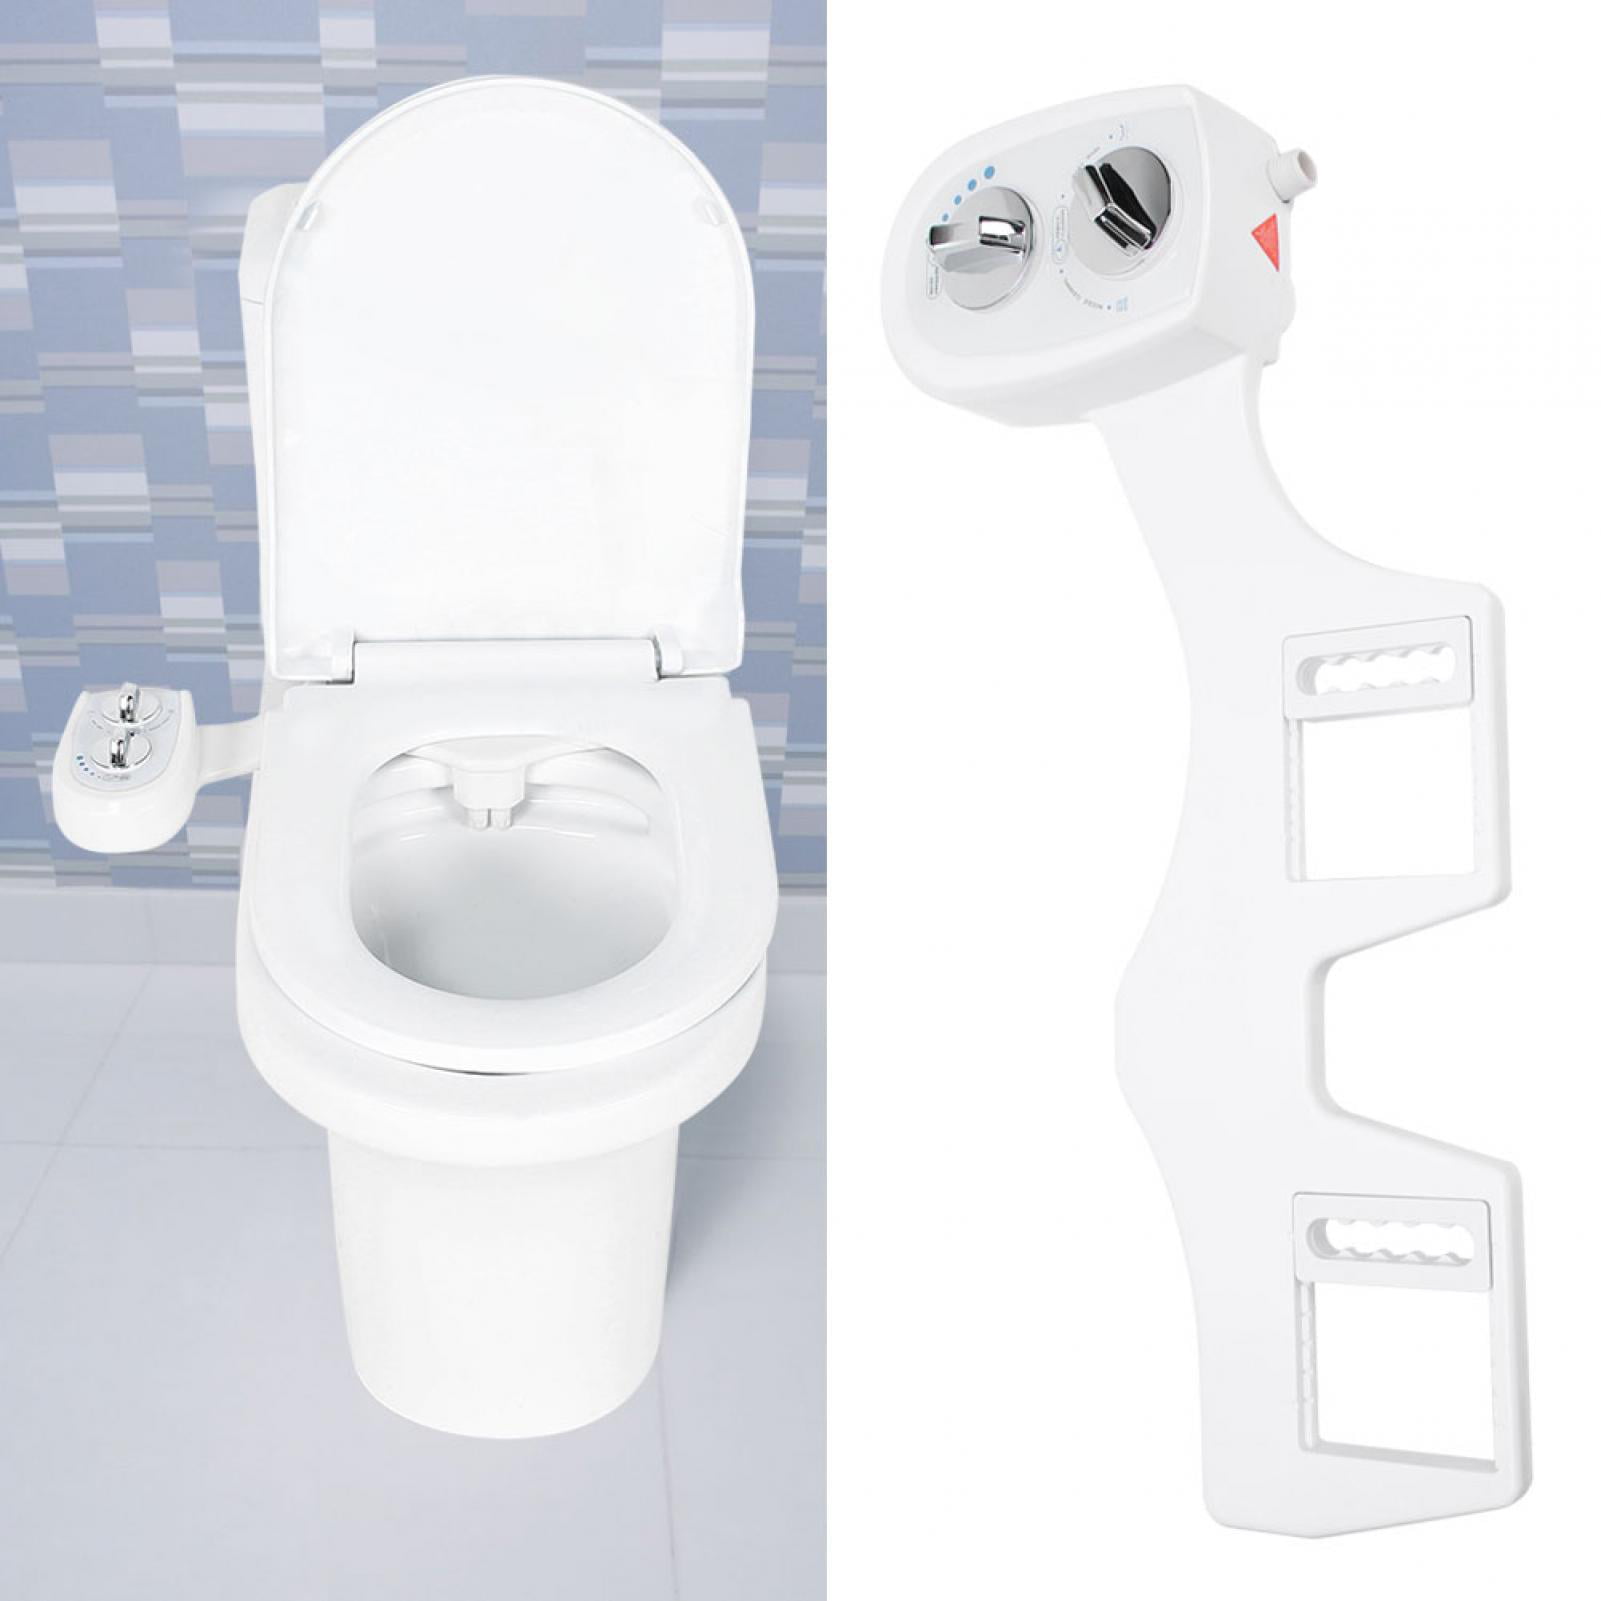 Adjustable Self-Cleaning Dual Nozzle Non-Electric Water Spray Bidet Toilet Seat 